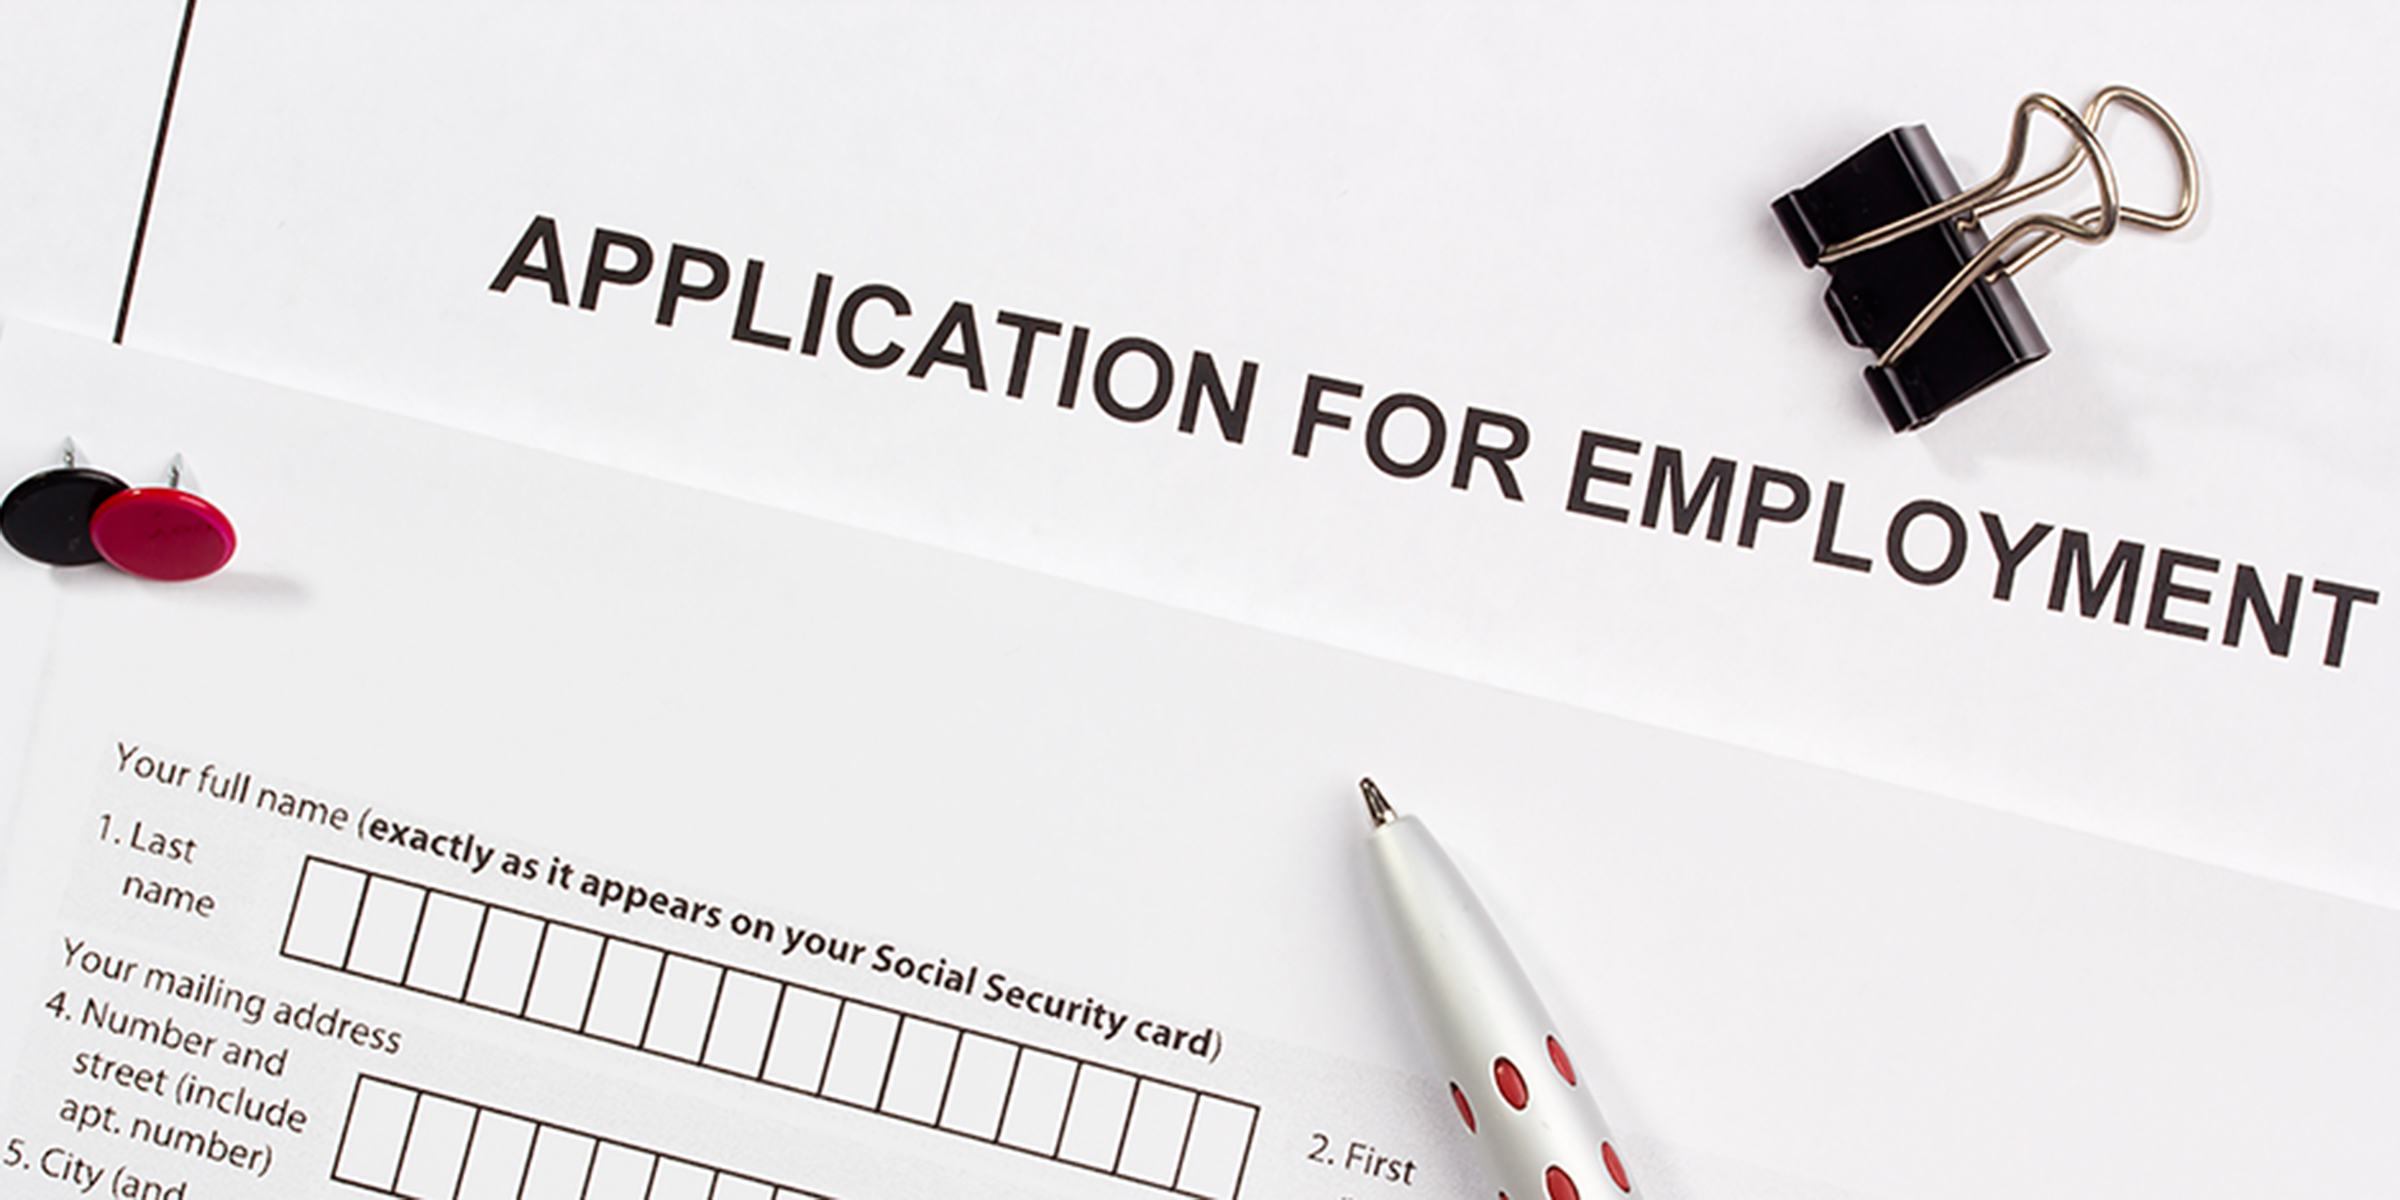 A picture of an application for employment